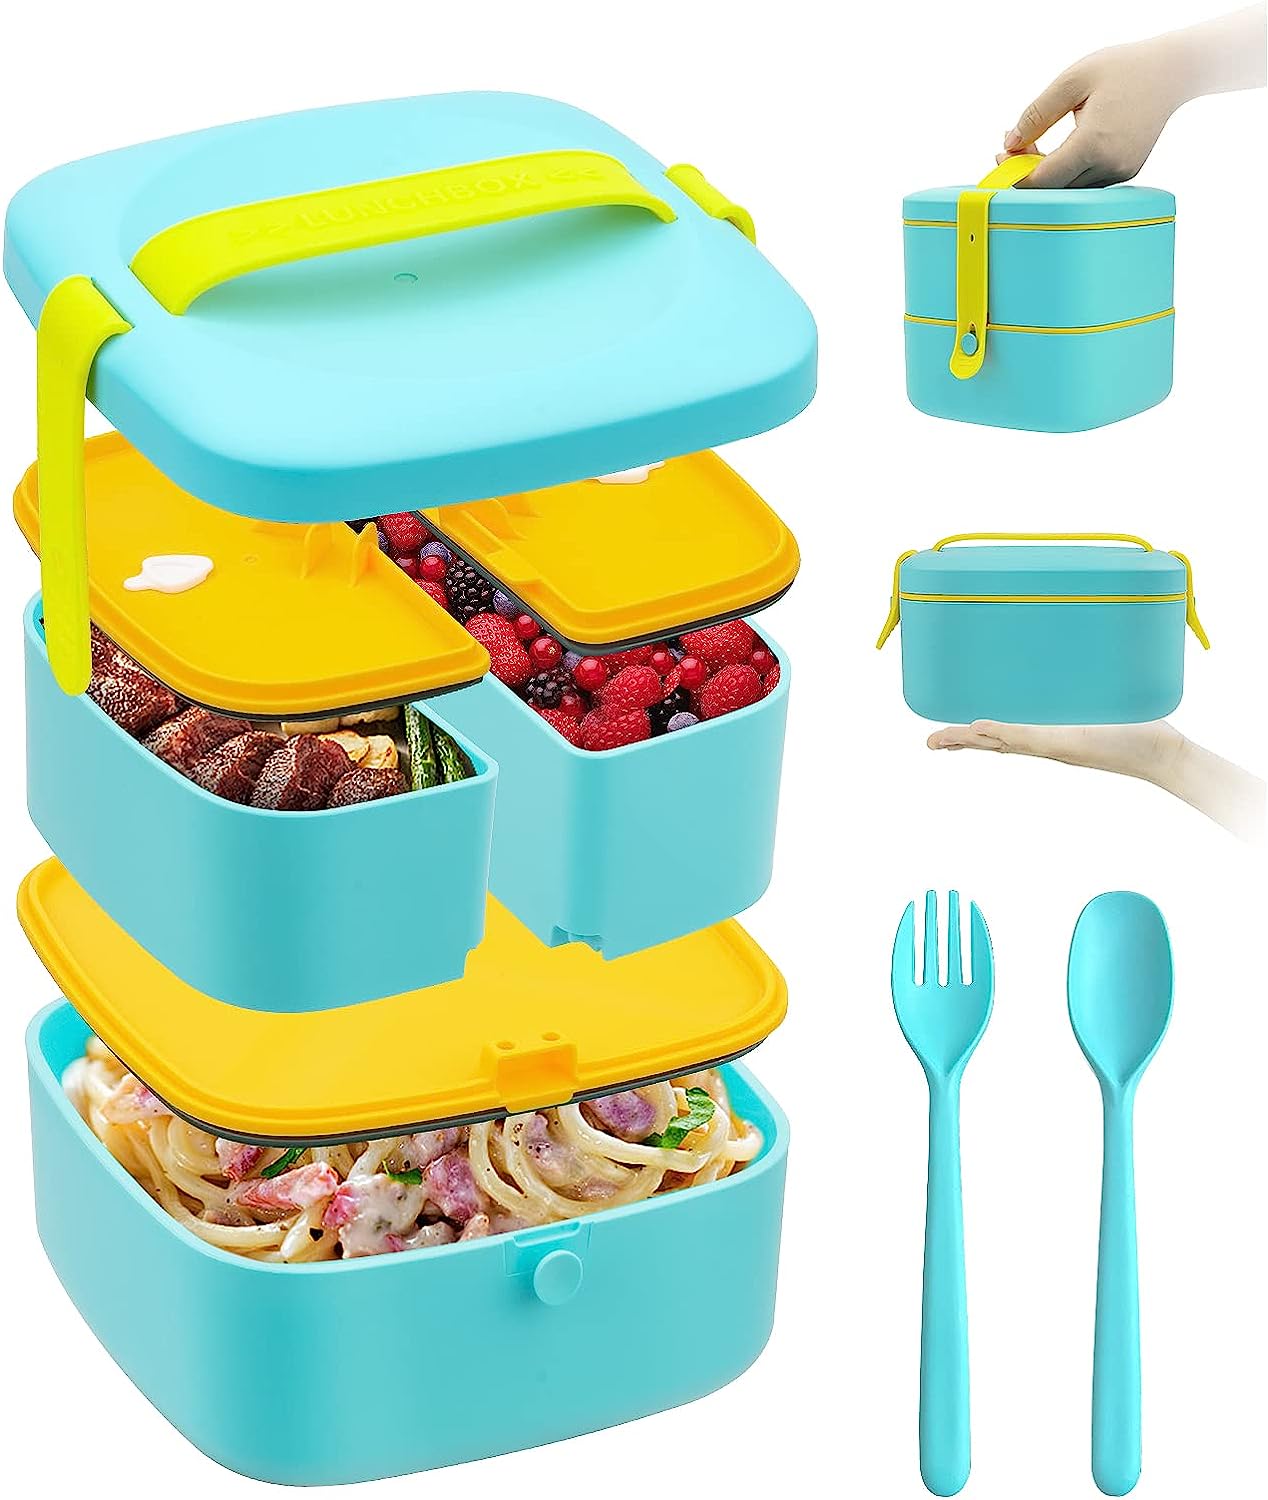 Bento Lunch Box 3-Compartment Leak Proof Microwave/Dishwasher Safe